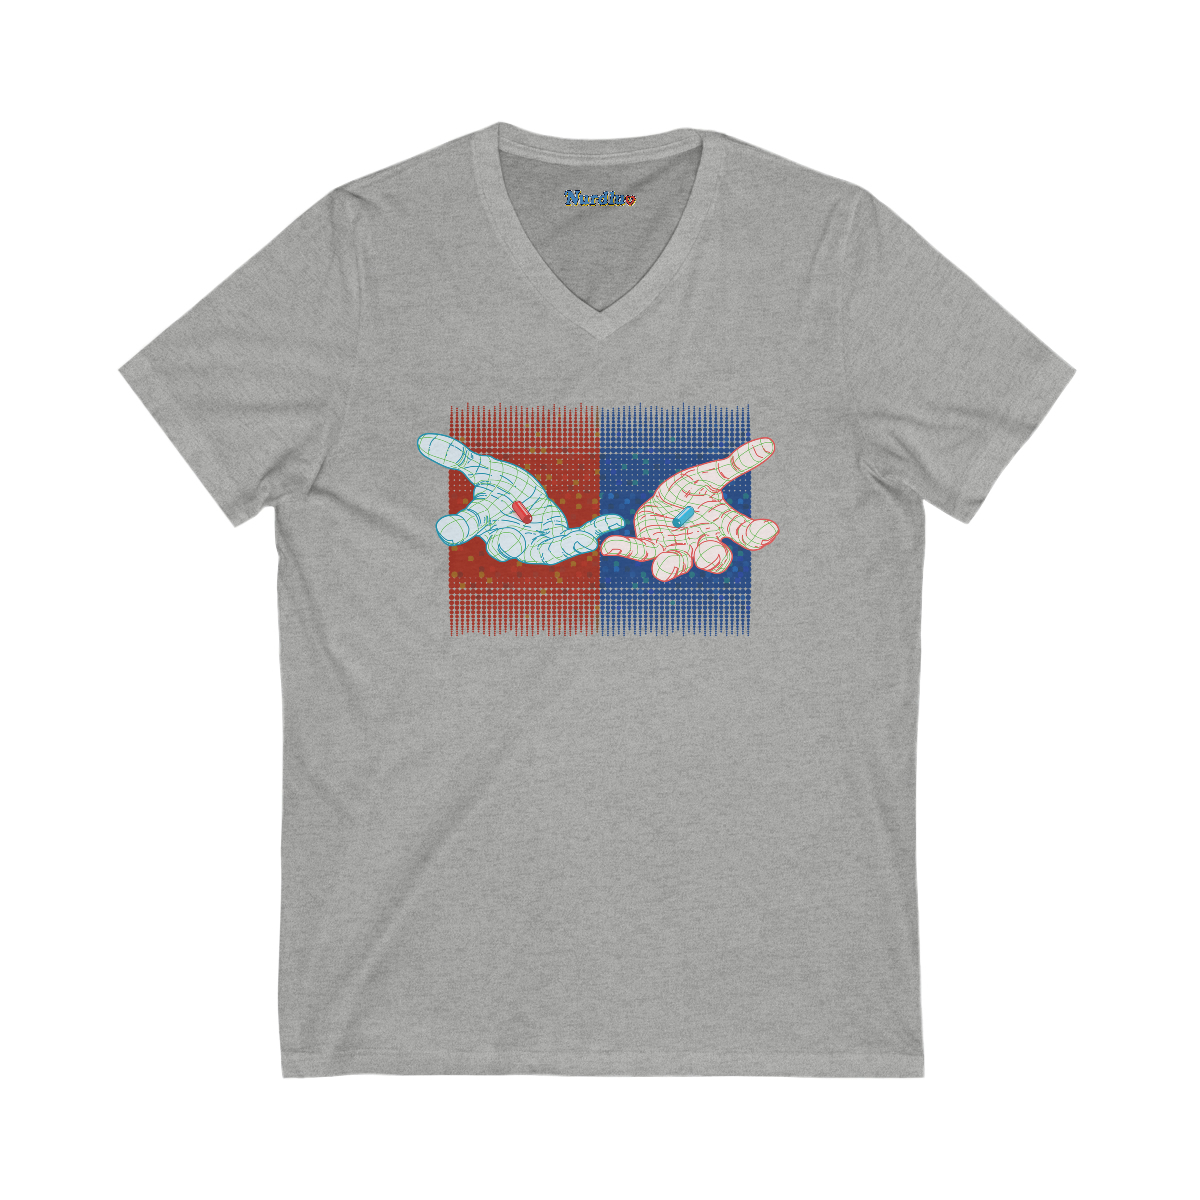 Two Hands (red & blue) - Unisex Jersey Short Sleeve V-Neck Tee